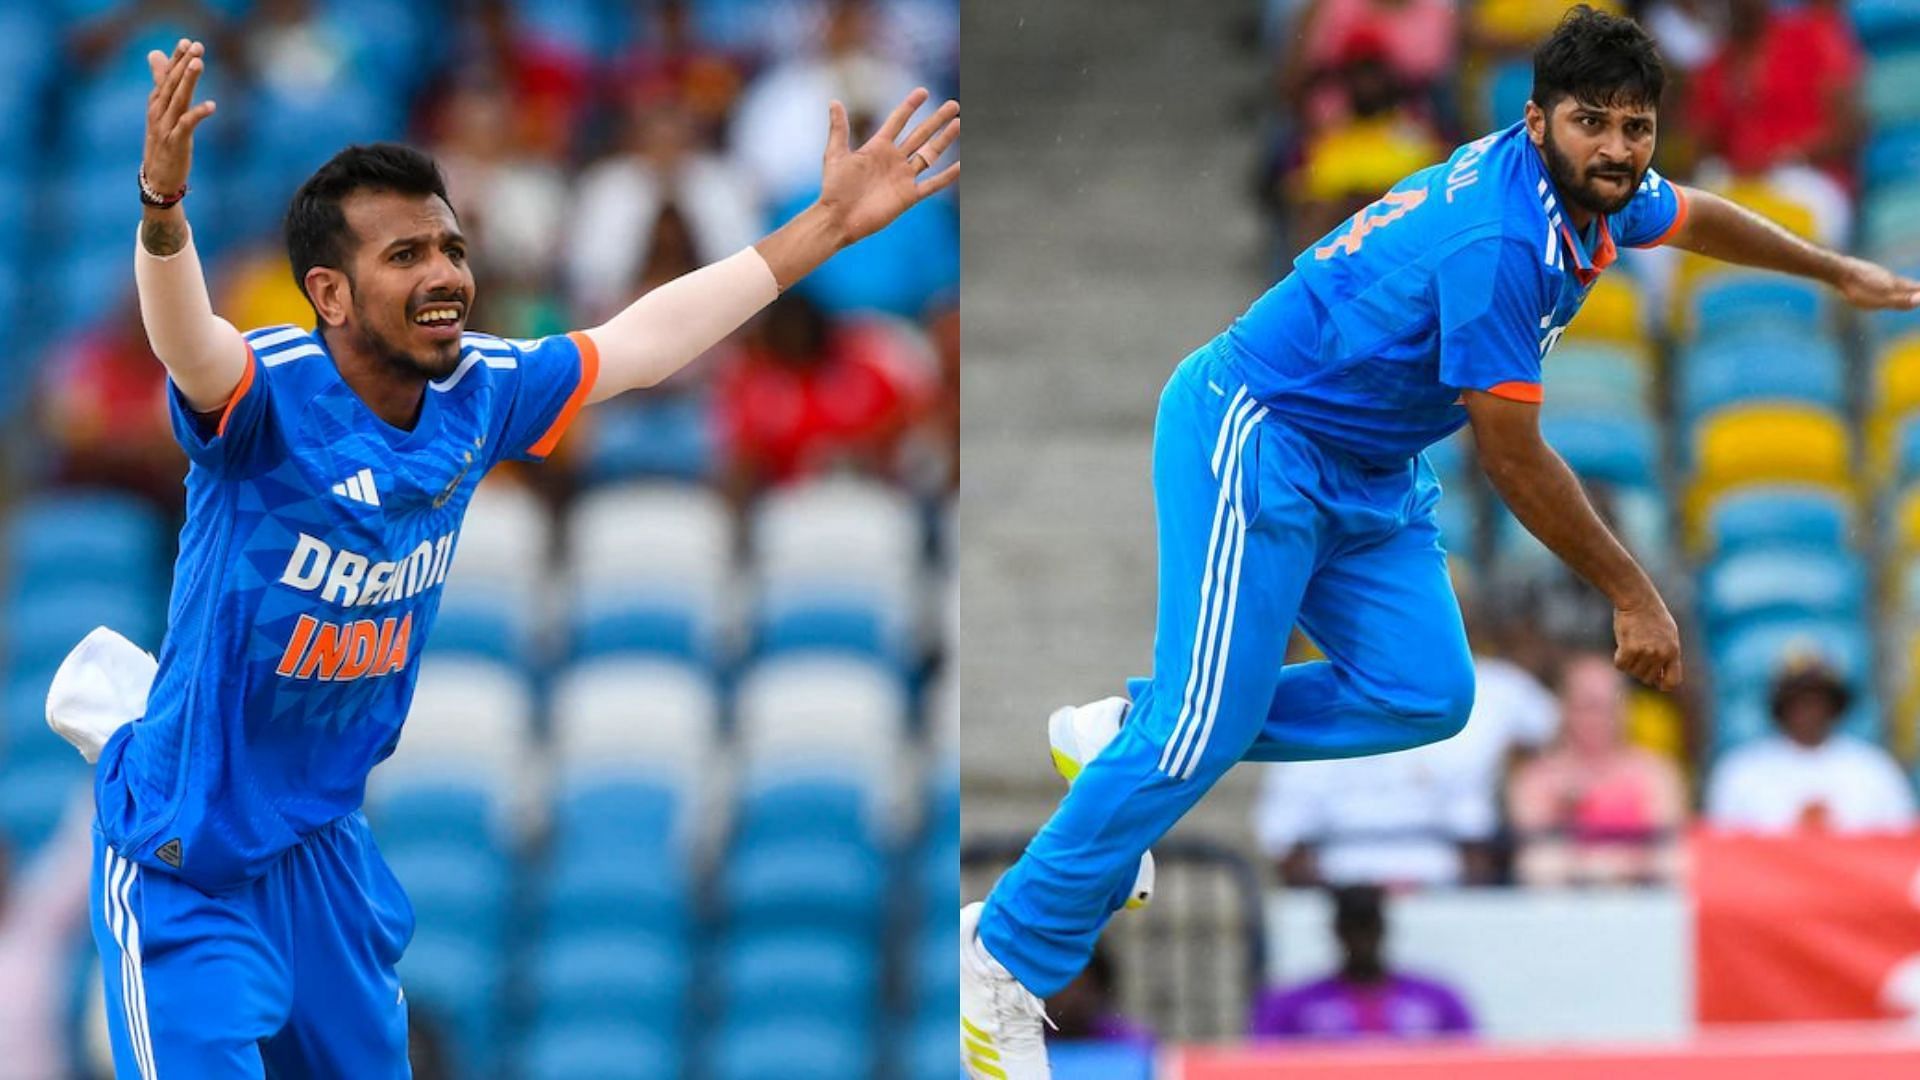 Sanjay Manjrekar includes Yuzvendra Chahal in India's 2023 World Cup squad; leaves out Shardul Thakur